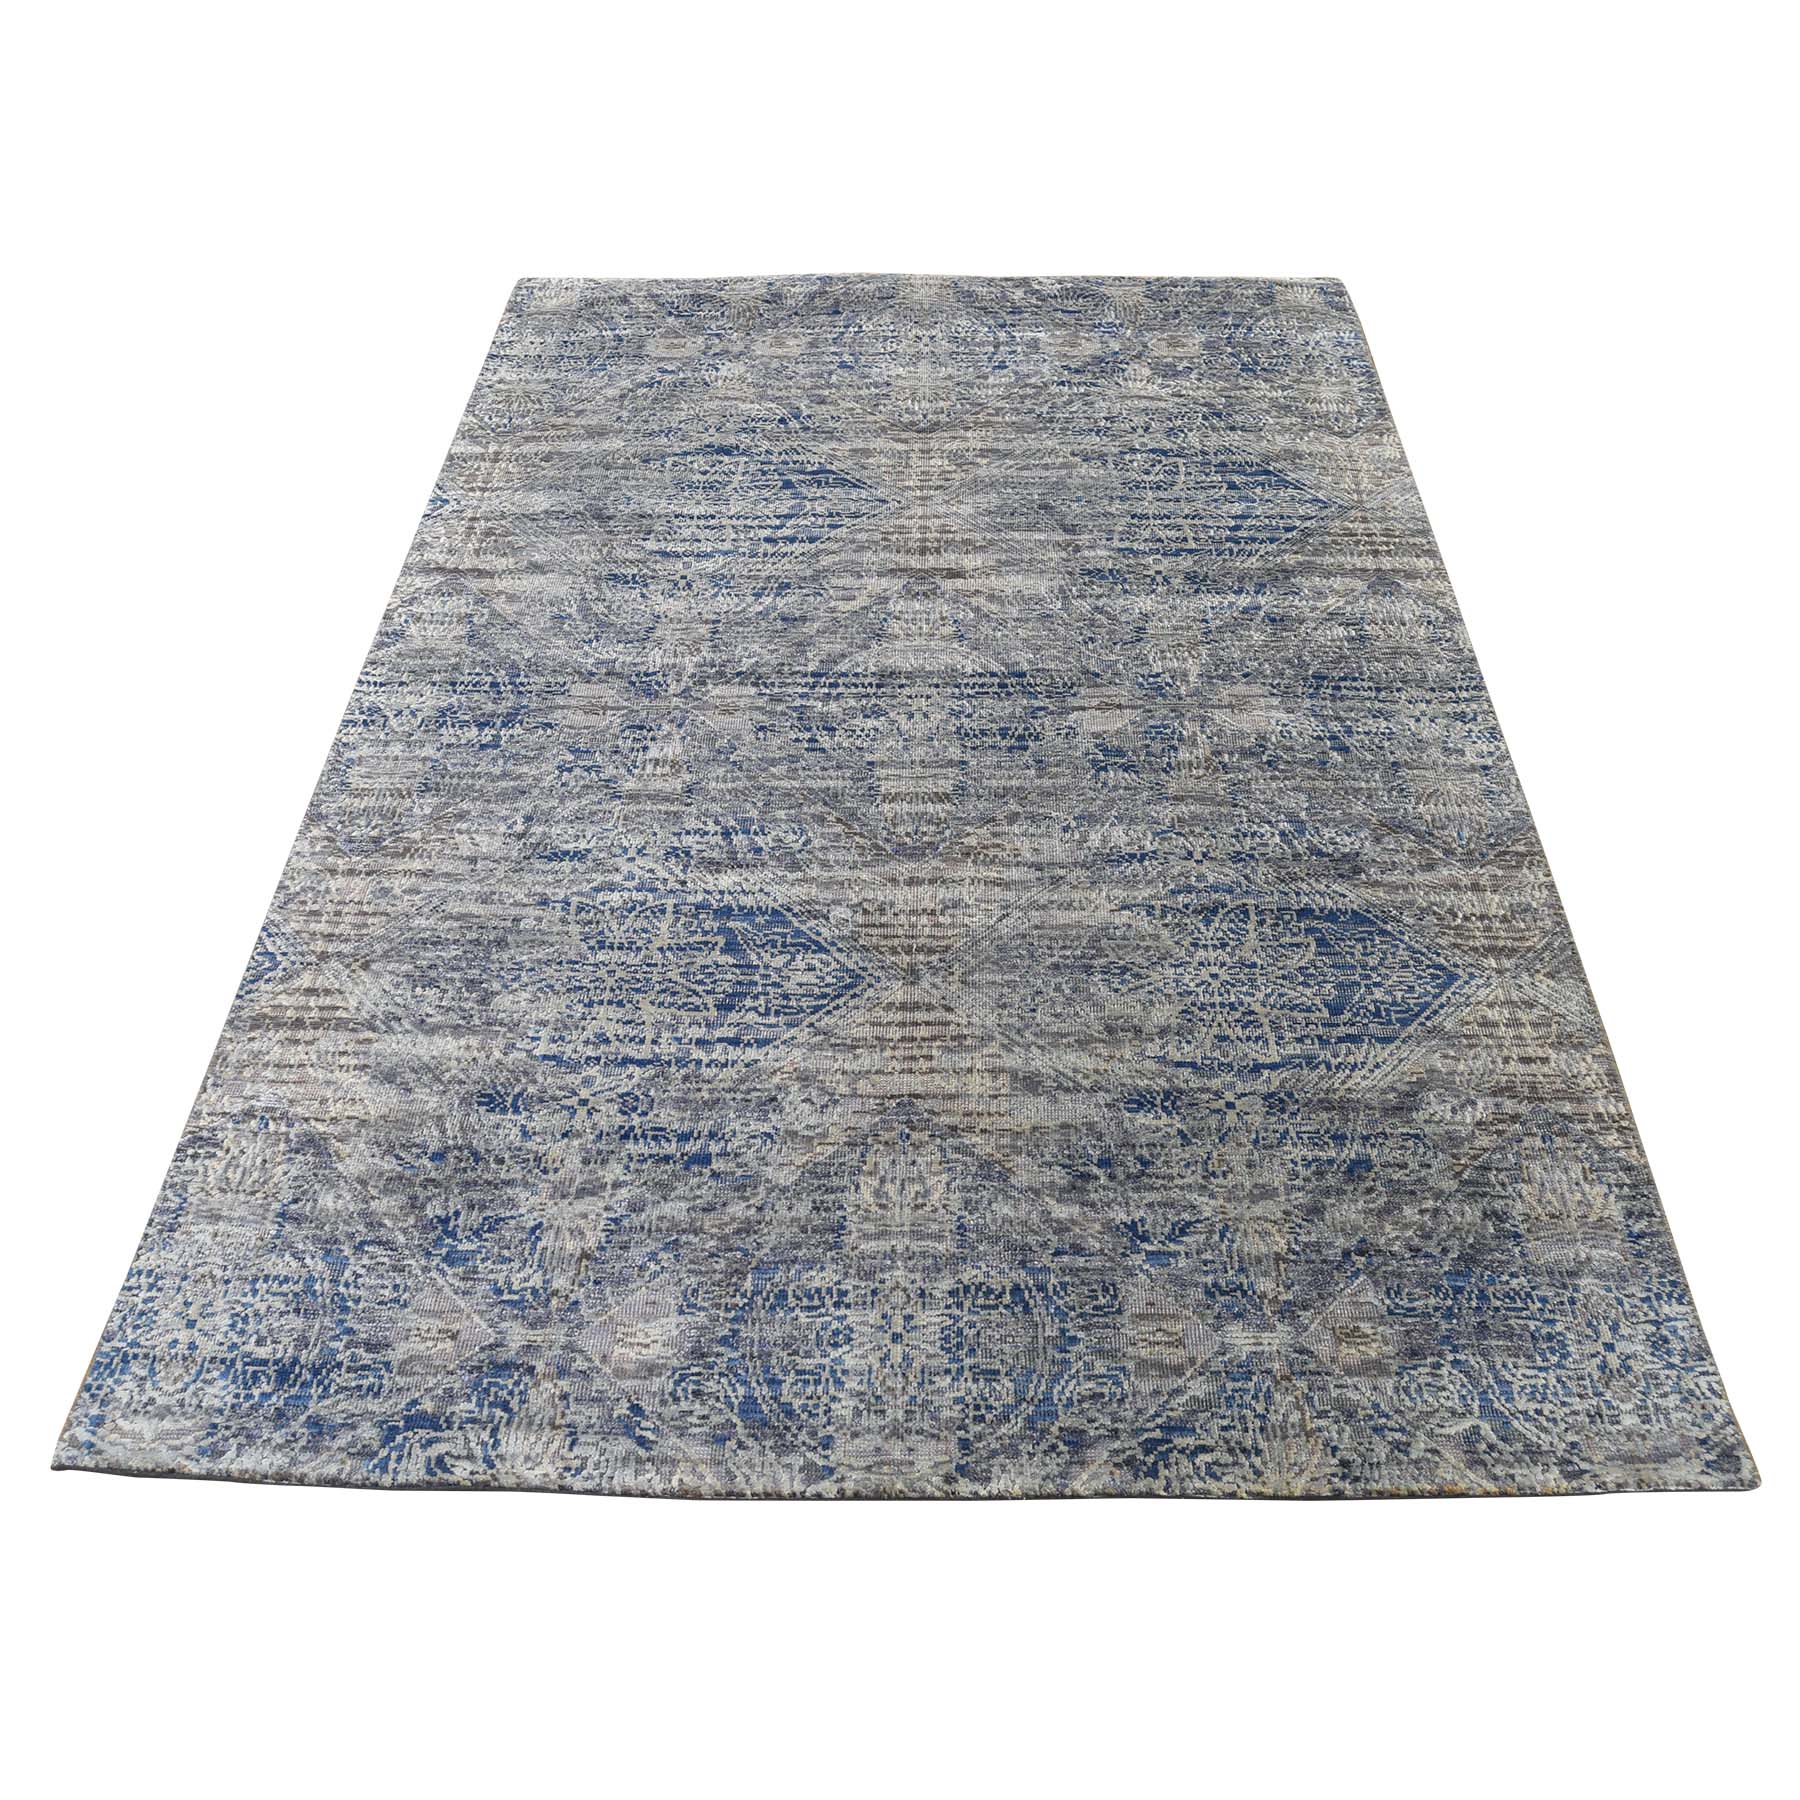 4'X6'2" Silk With Oxidized Wool Denim Blue Erased Rossette Design Hand-Knotted Oriental Rug moaddbeb